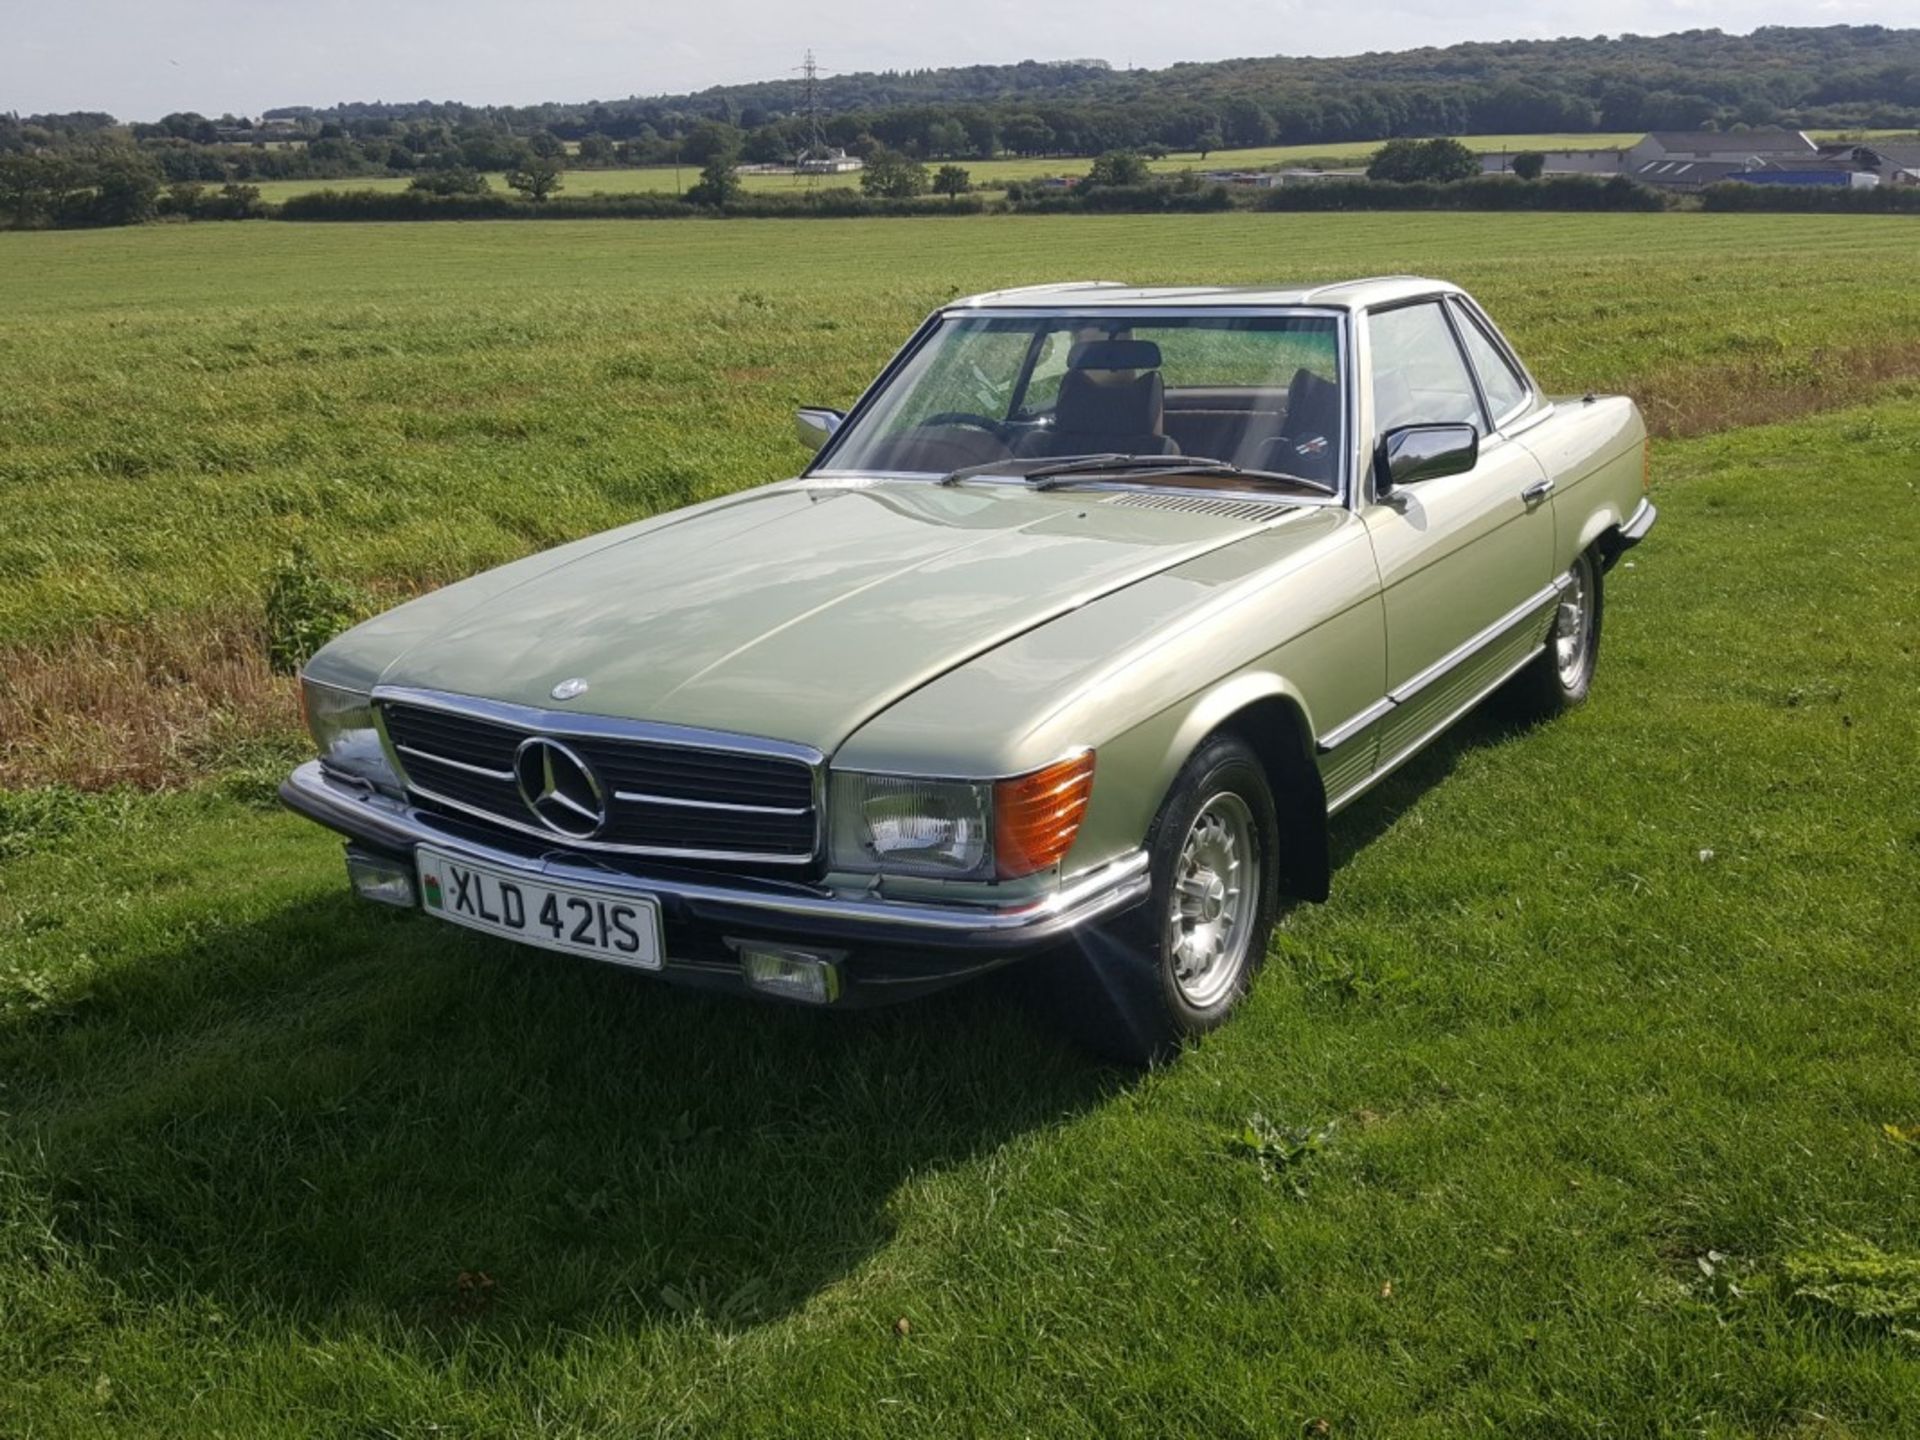 Mercedes 450SL Automatic 1978 - Image 5 of 12